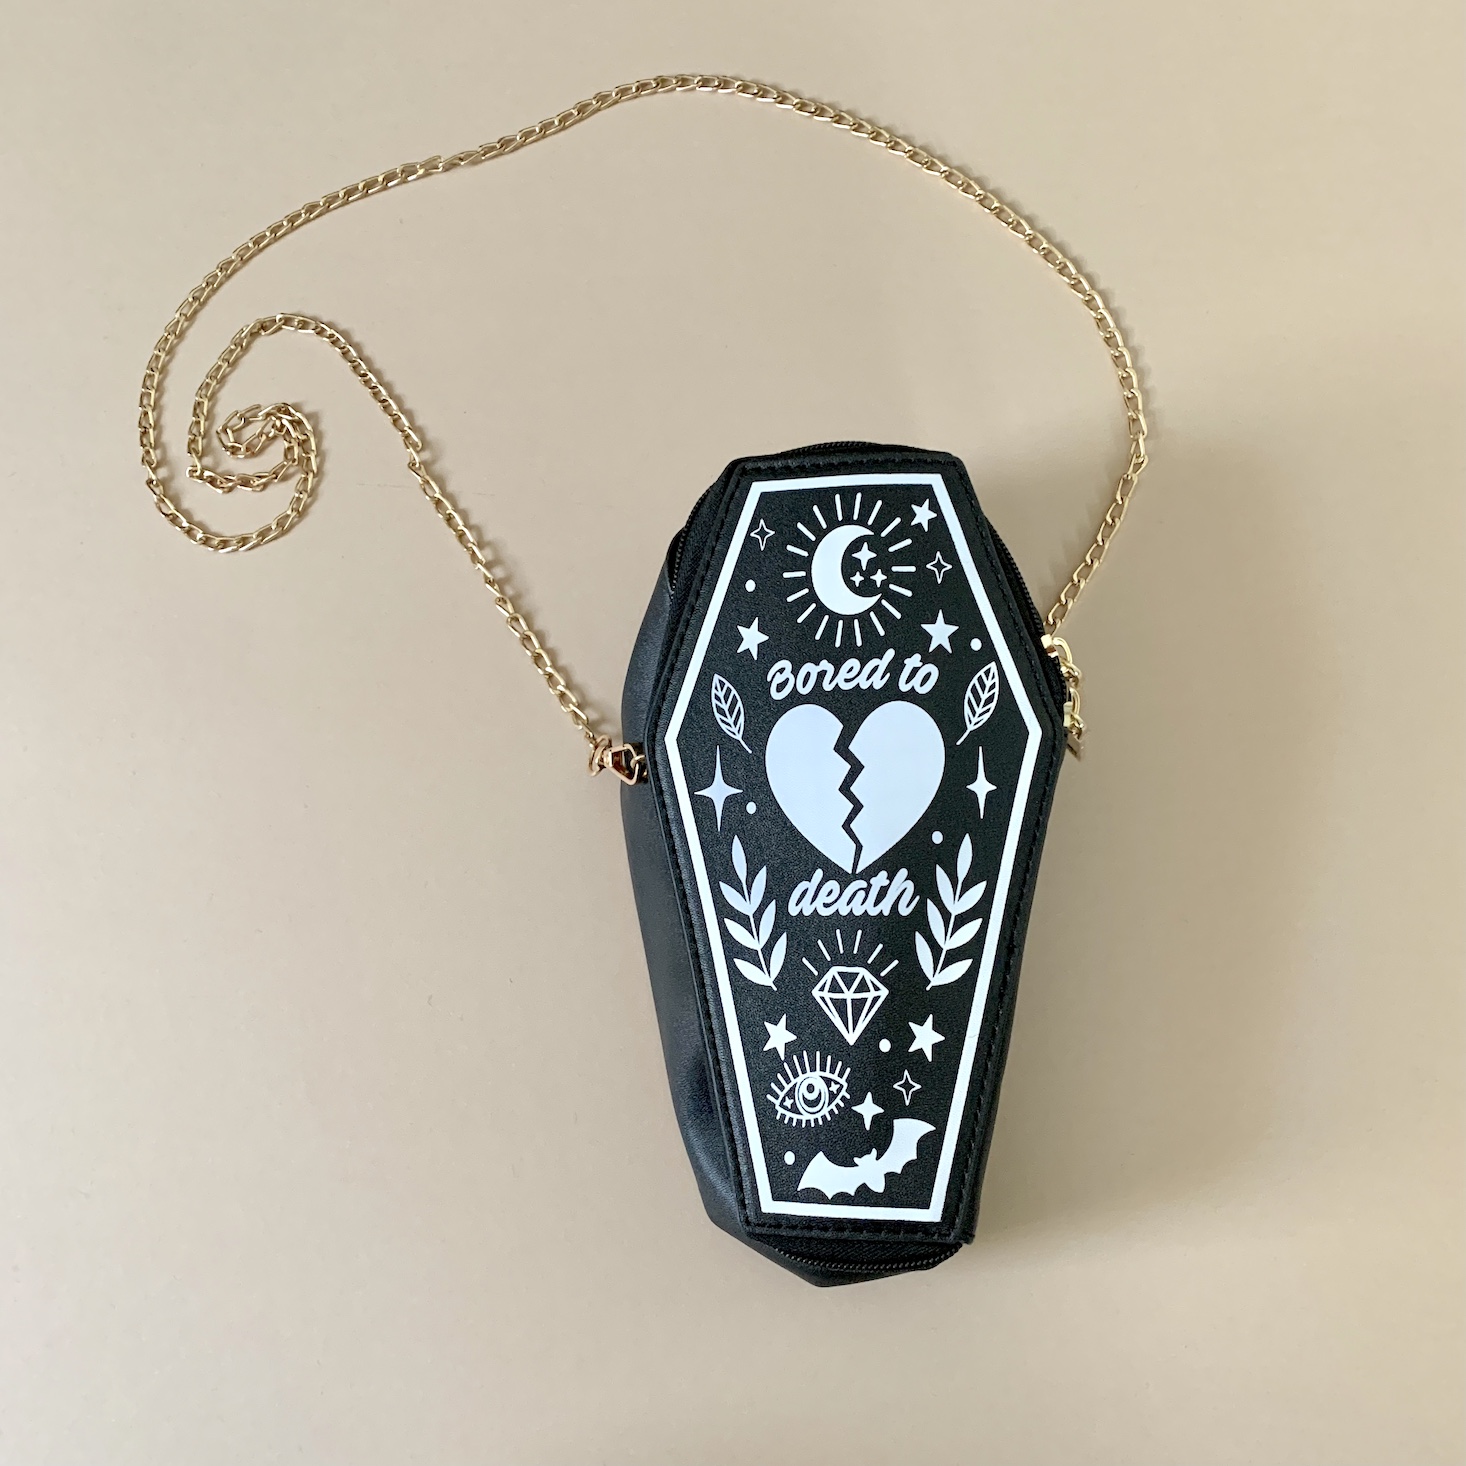 coffin shaped purse that said "bored to death"